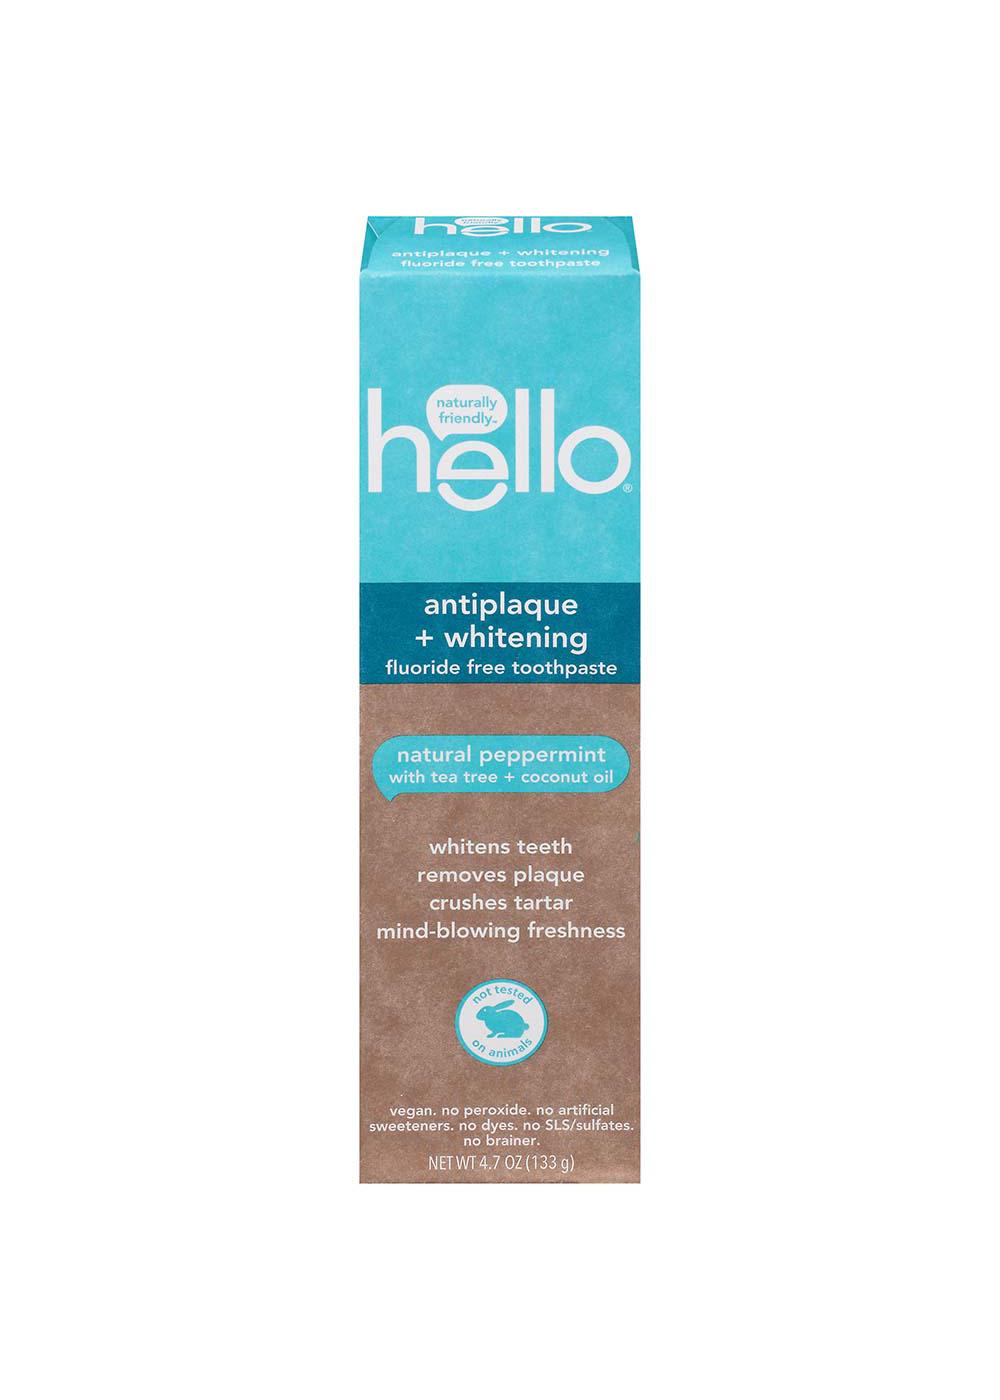 hello Antiplaque + Whitening Fluoride Free Toothpaste - Natural Peppermint; image 1 of 10